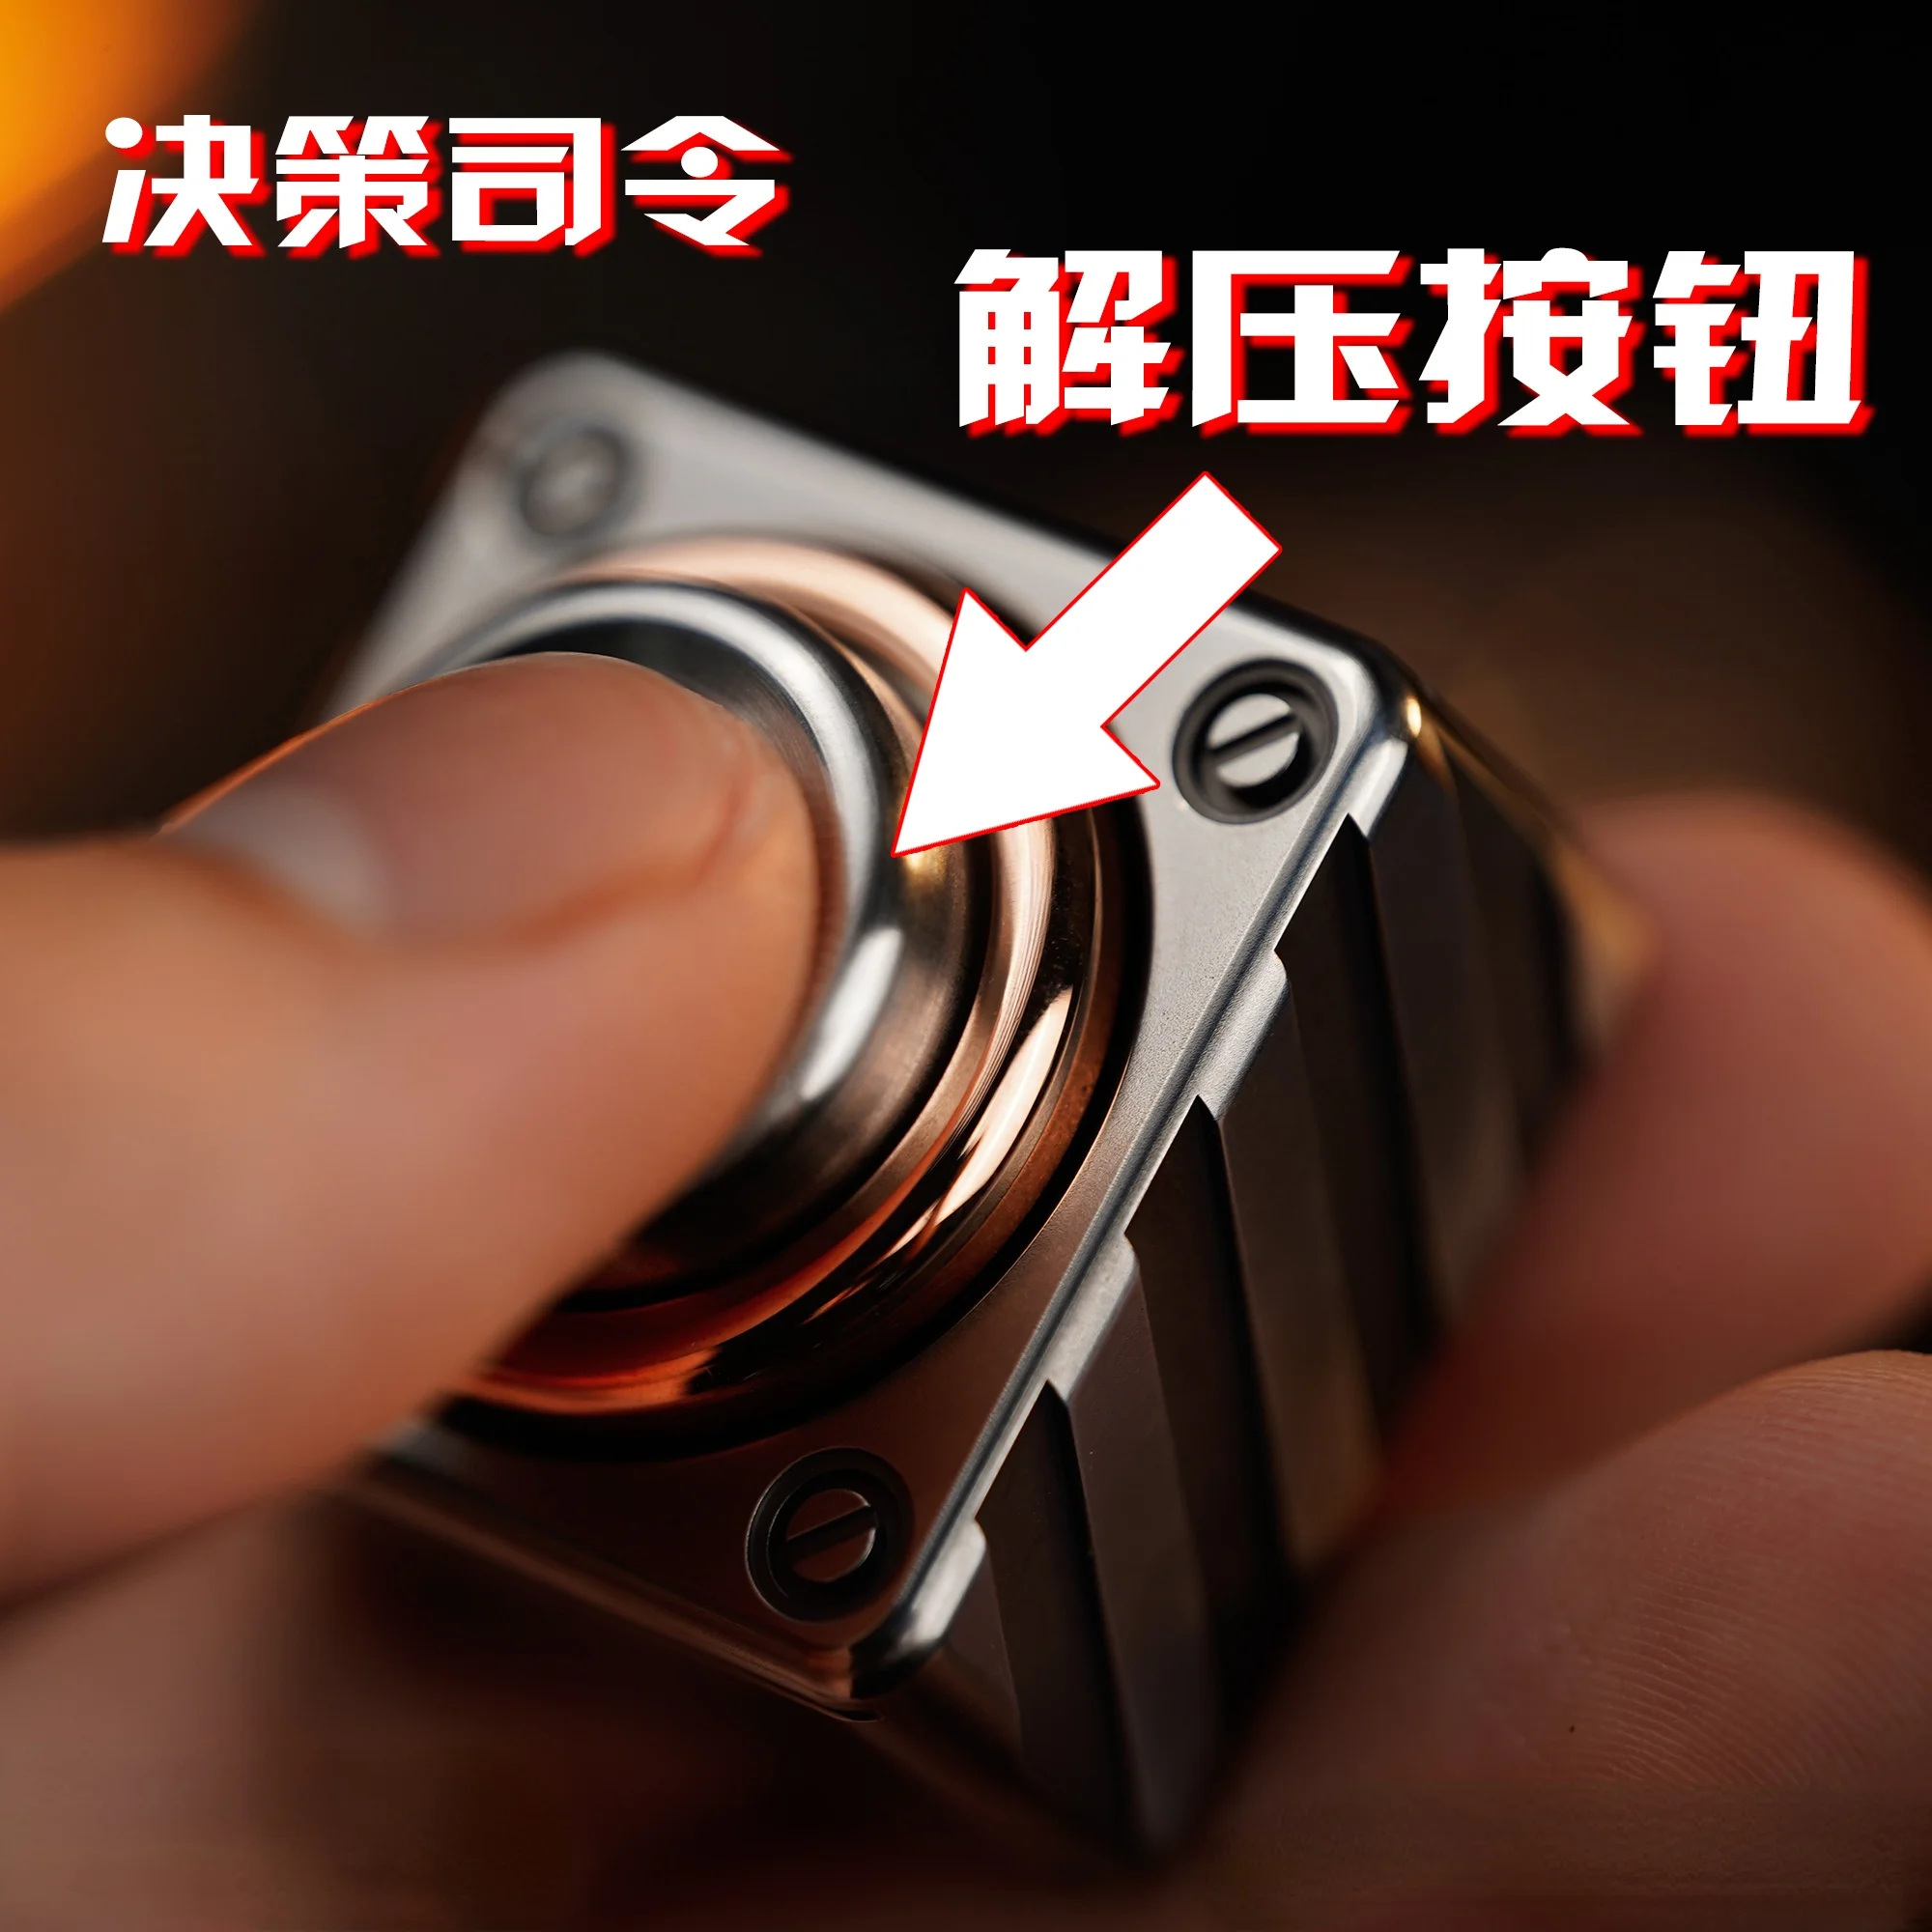 EDC Waste Soil Technology Decision Commander Combination Button Fingertip Gyro Metal Pressure Reduction Toy enlarge